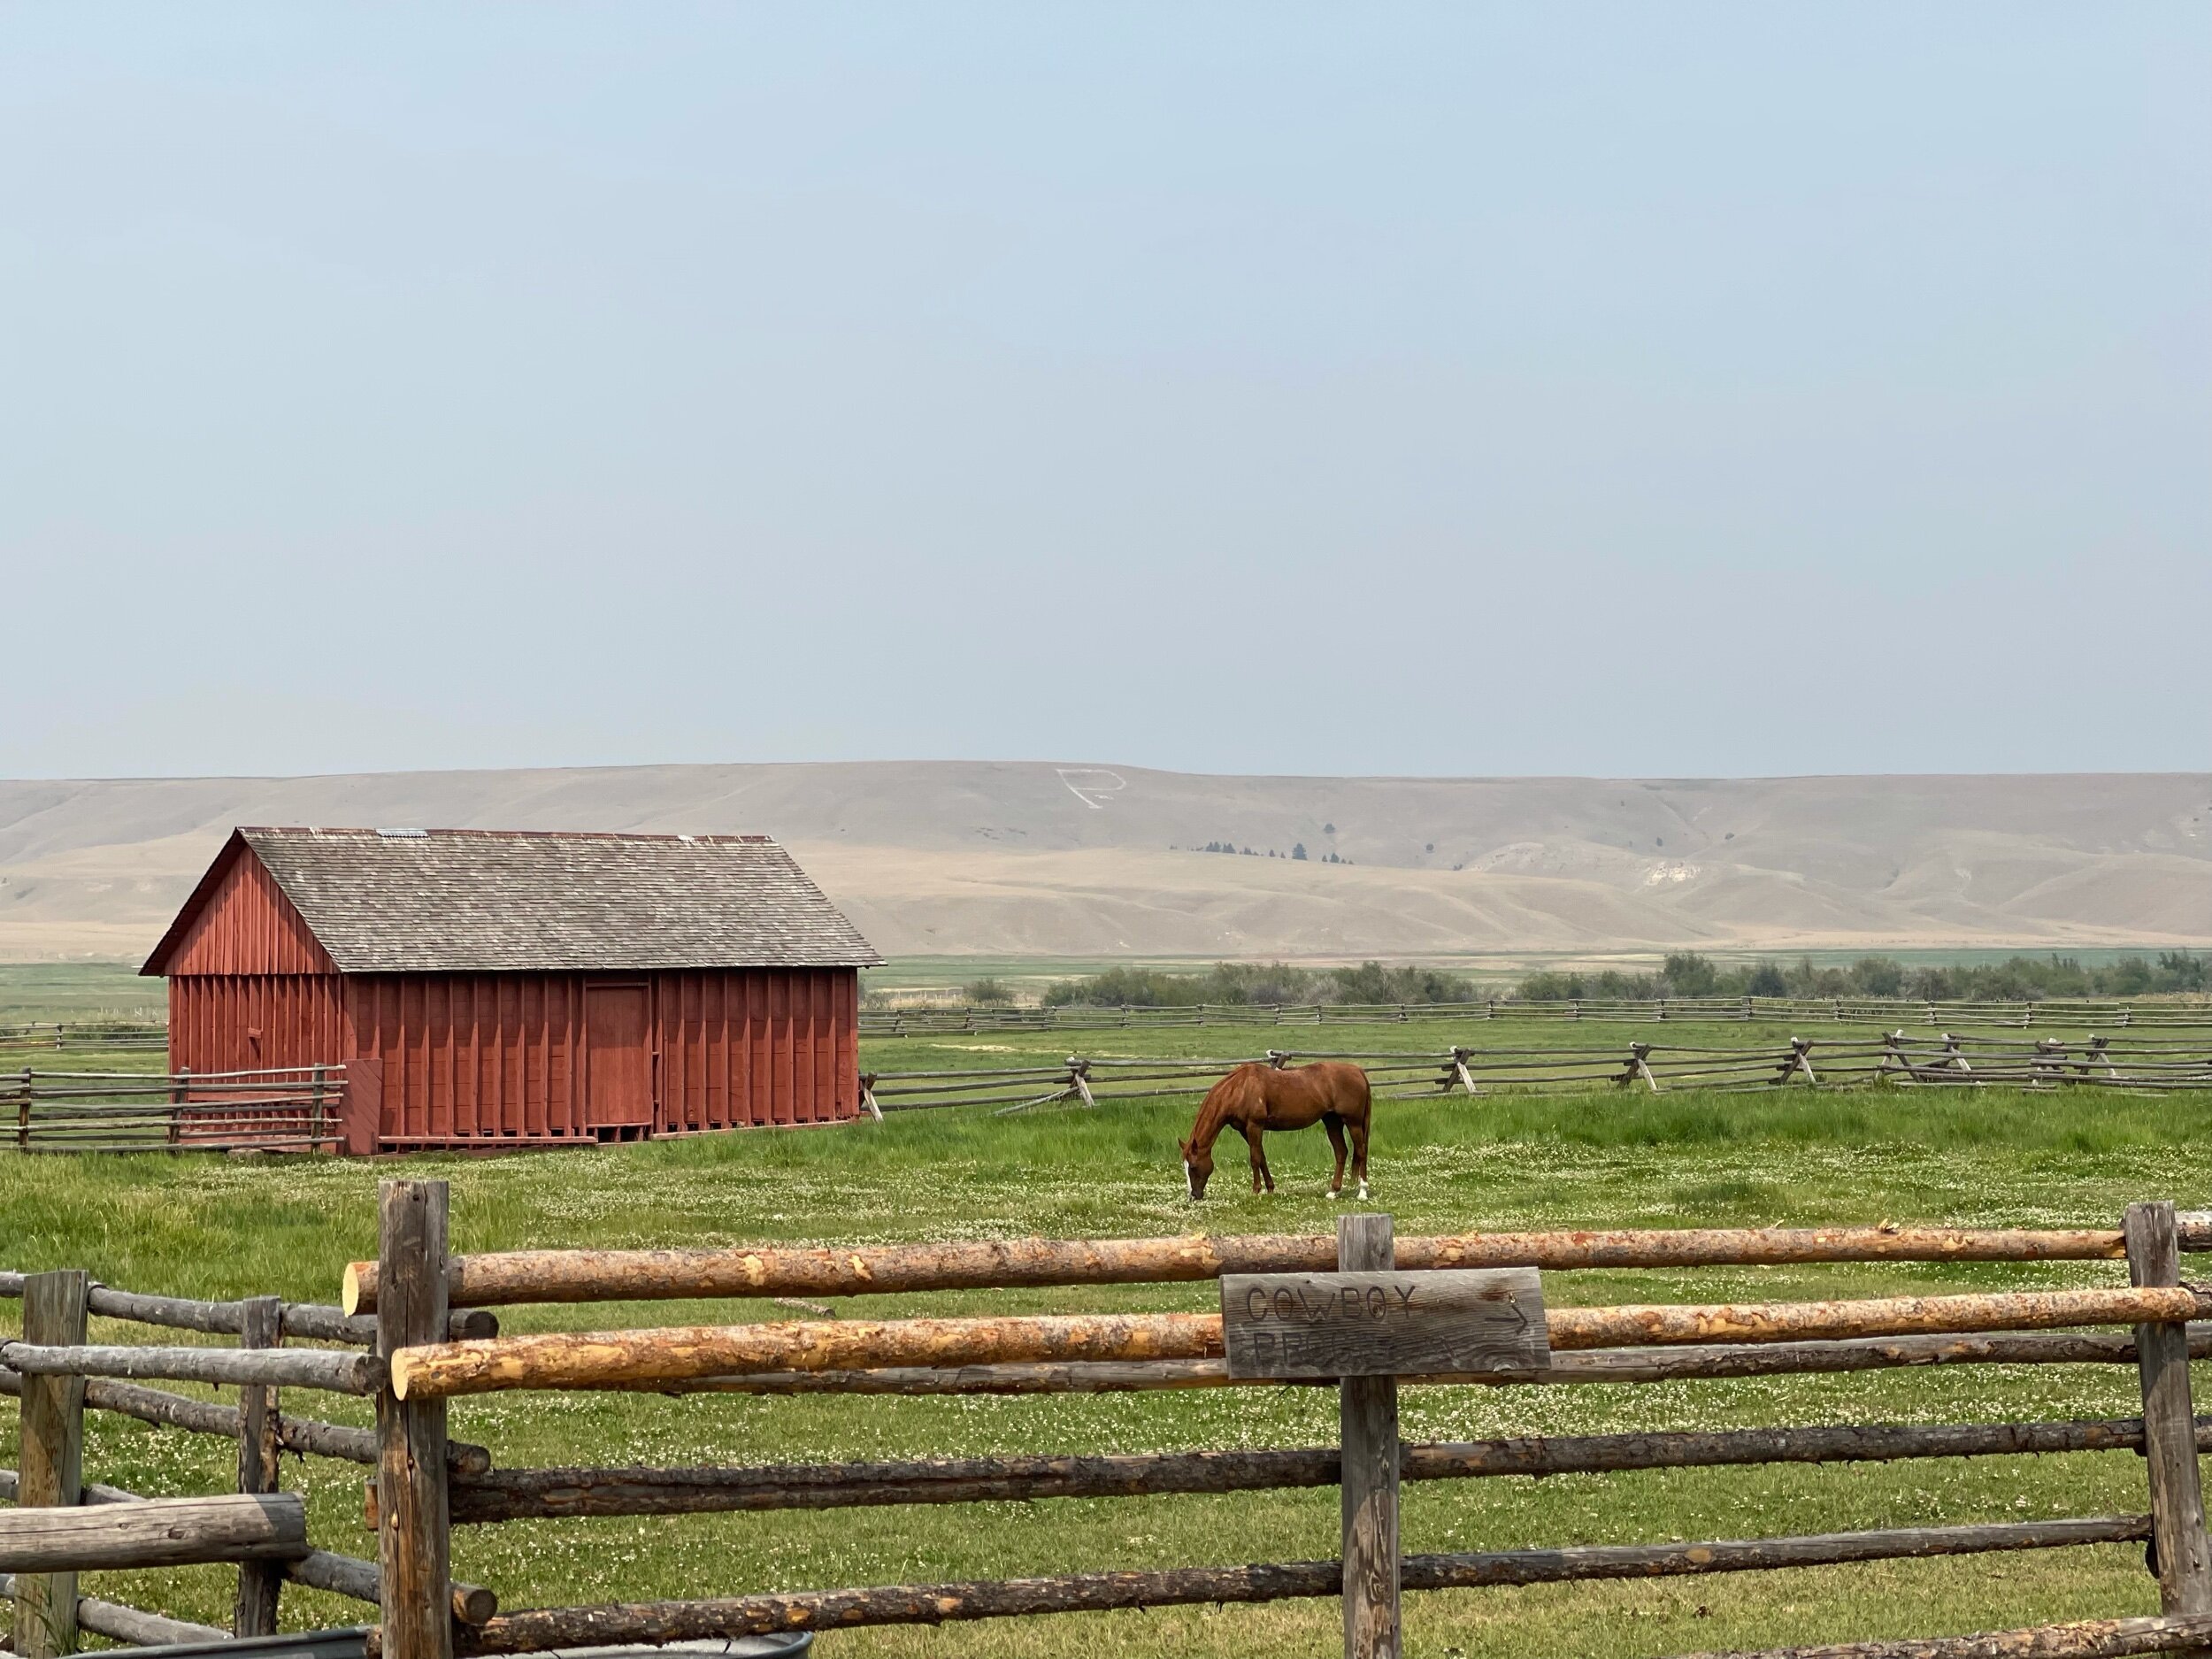  Charming scenes like this can be seen all over the US, but this particular one is at the  Grant-Kohrs Ranch National Historic Site  in Deer Lodge. This 1,600+ acre ranch, in operation since the 1850s, is still fully active and maintained by the Nati